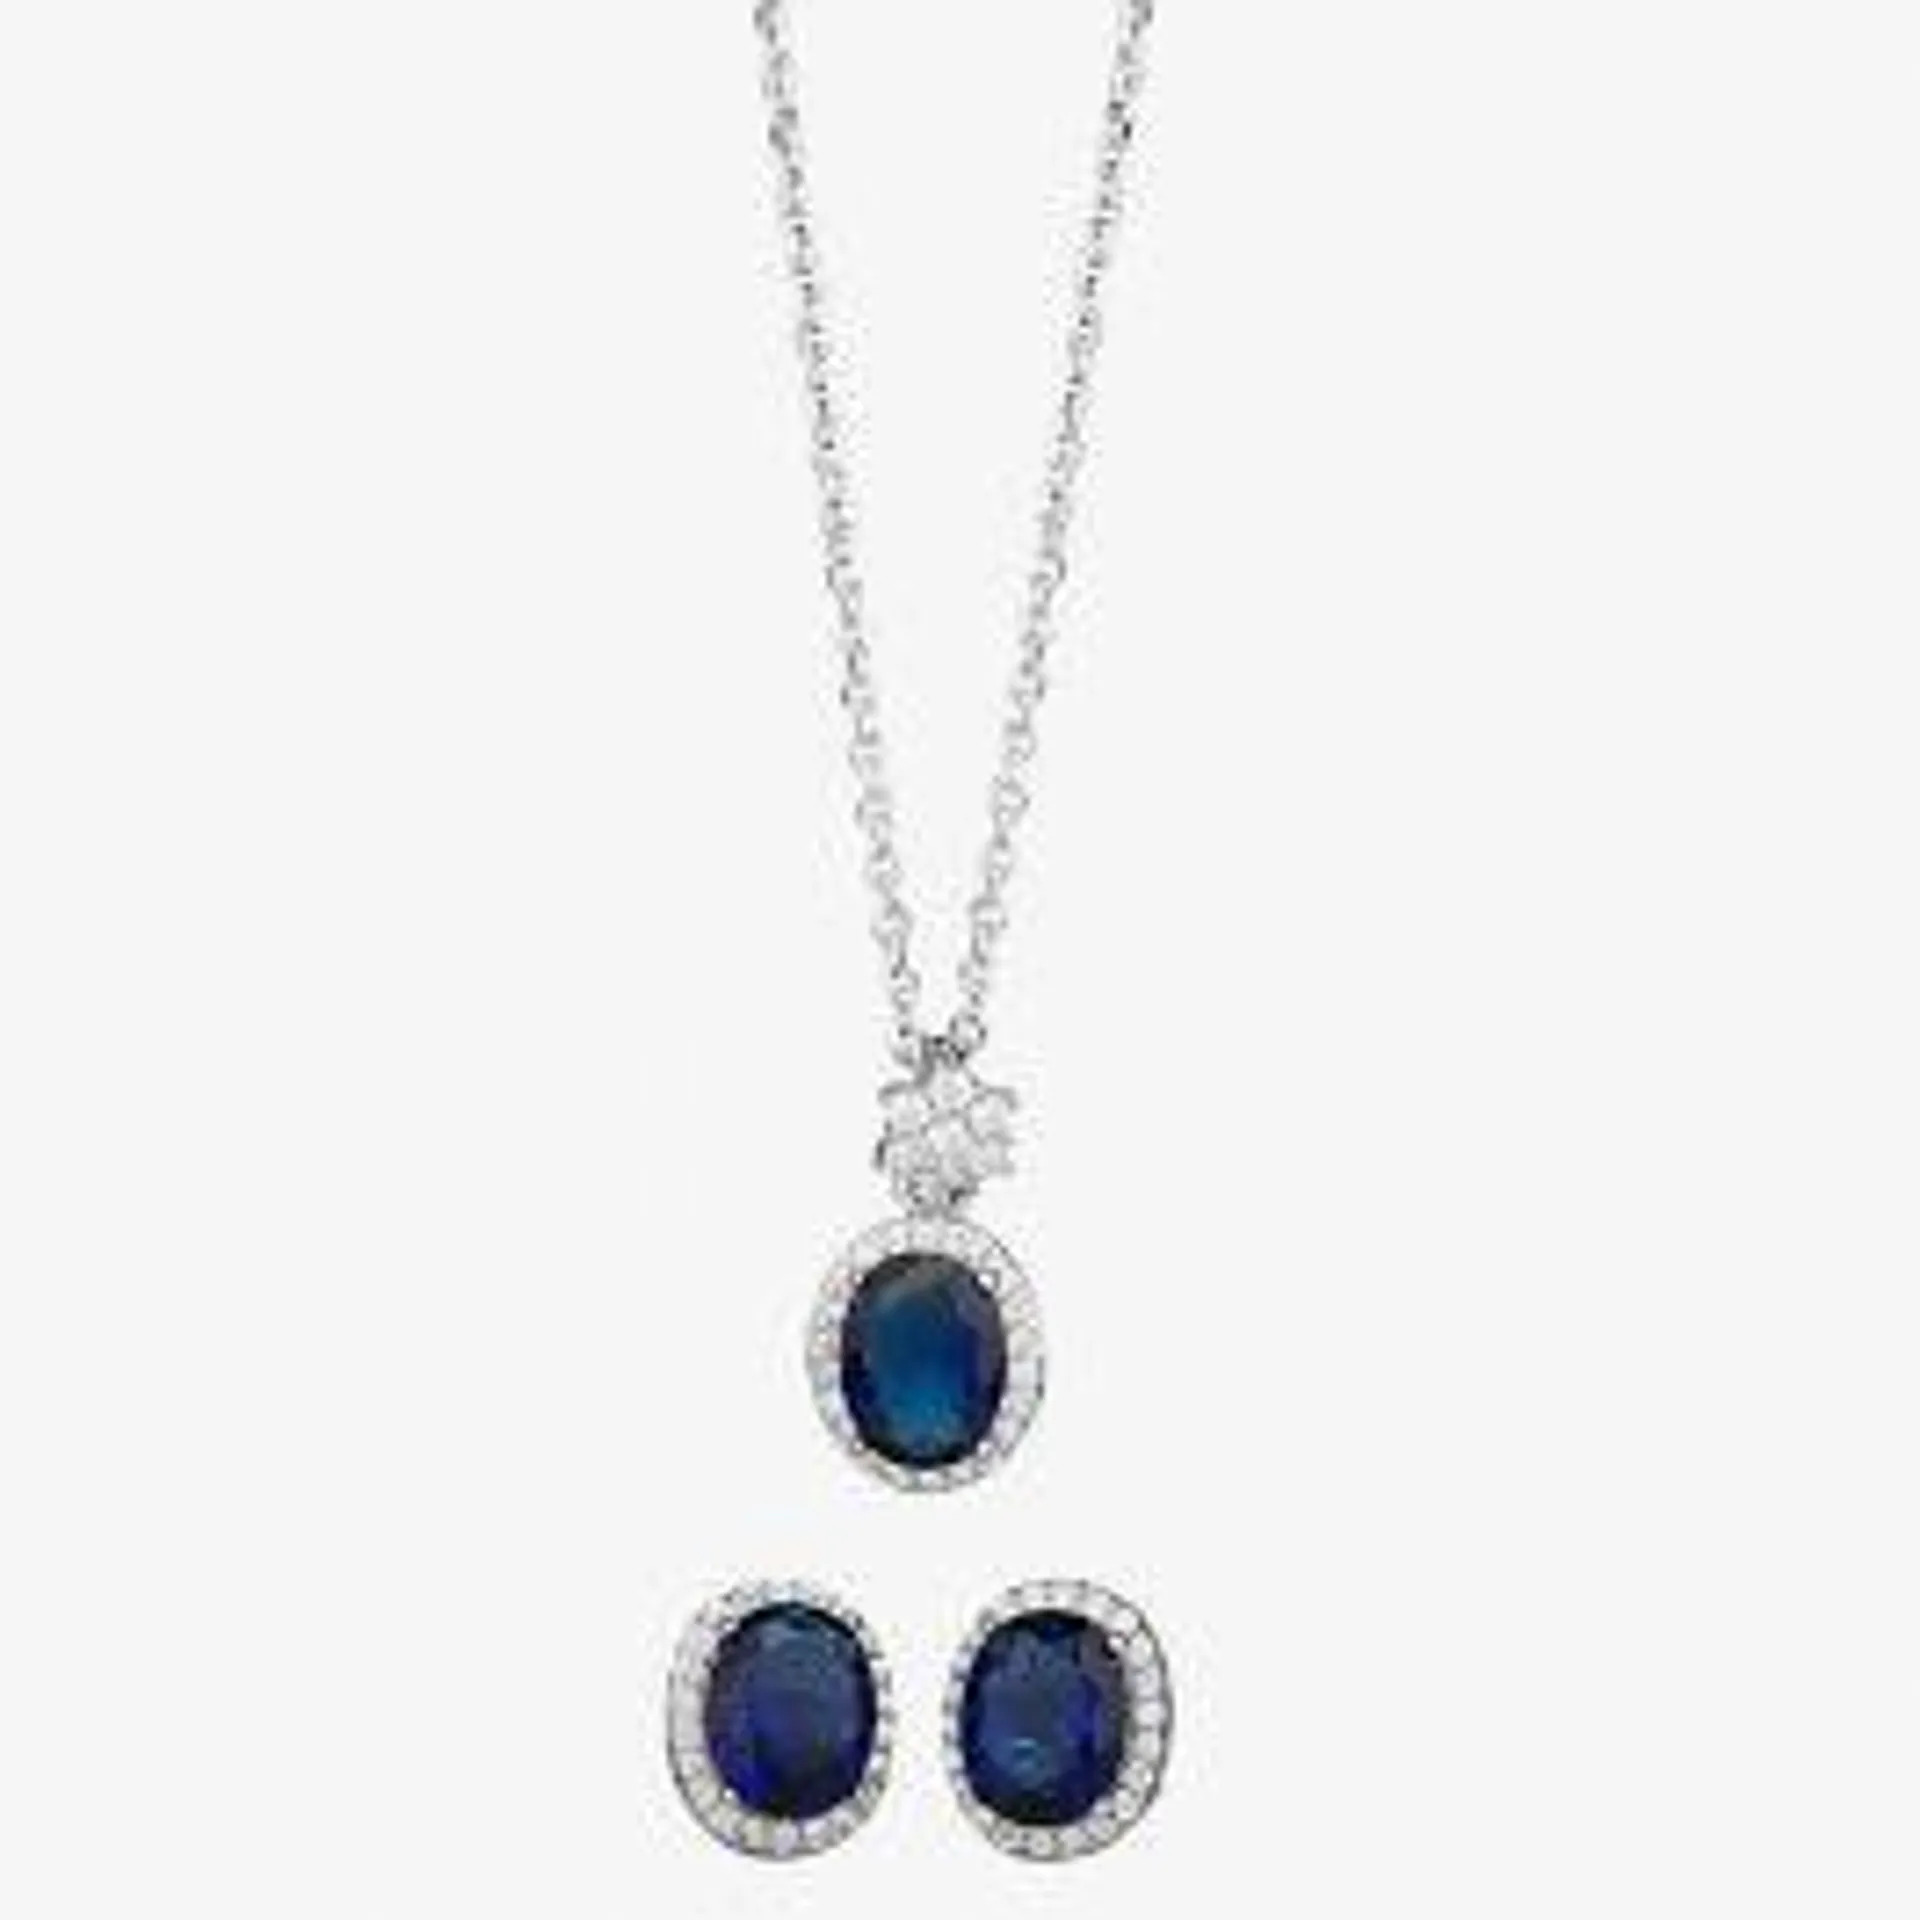 Silver Blue Cubic Zirconia Oval Pendant and Earrings SET11163